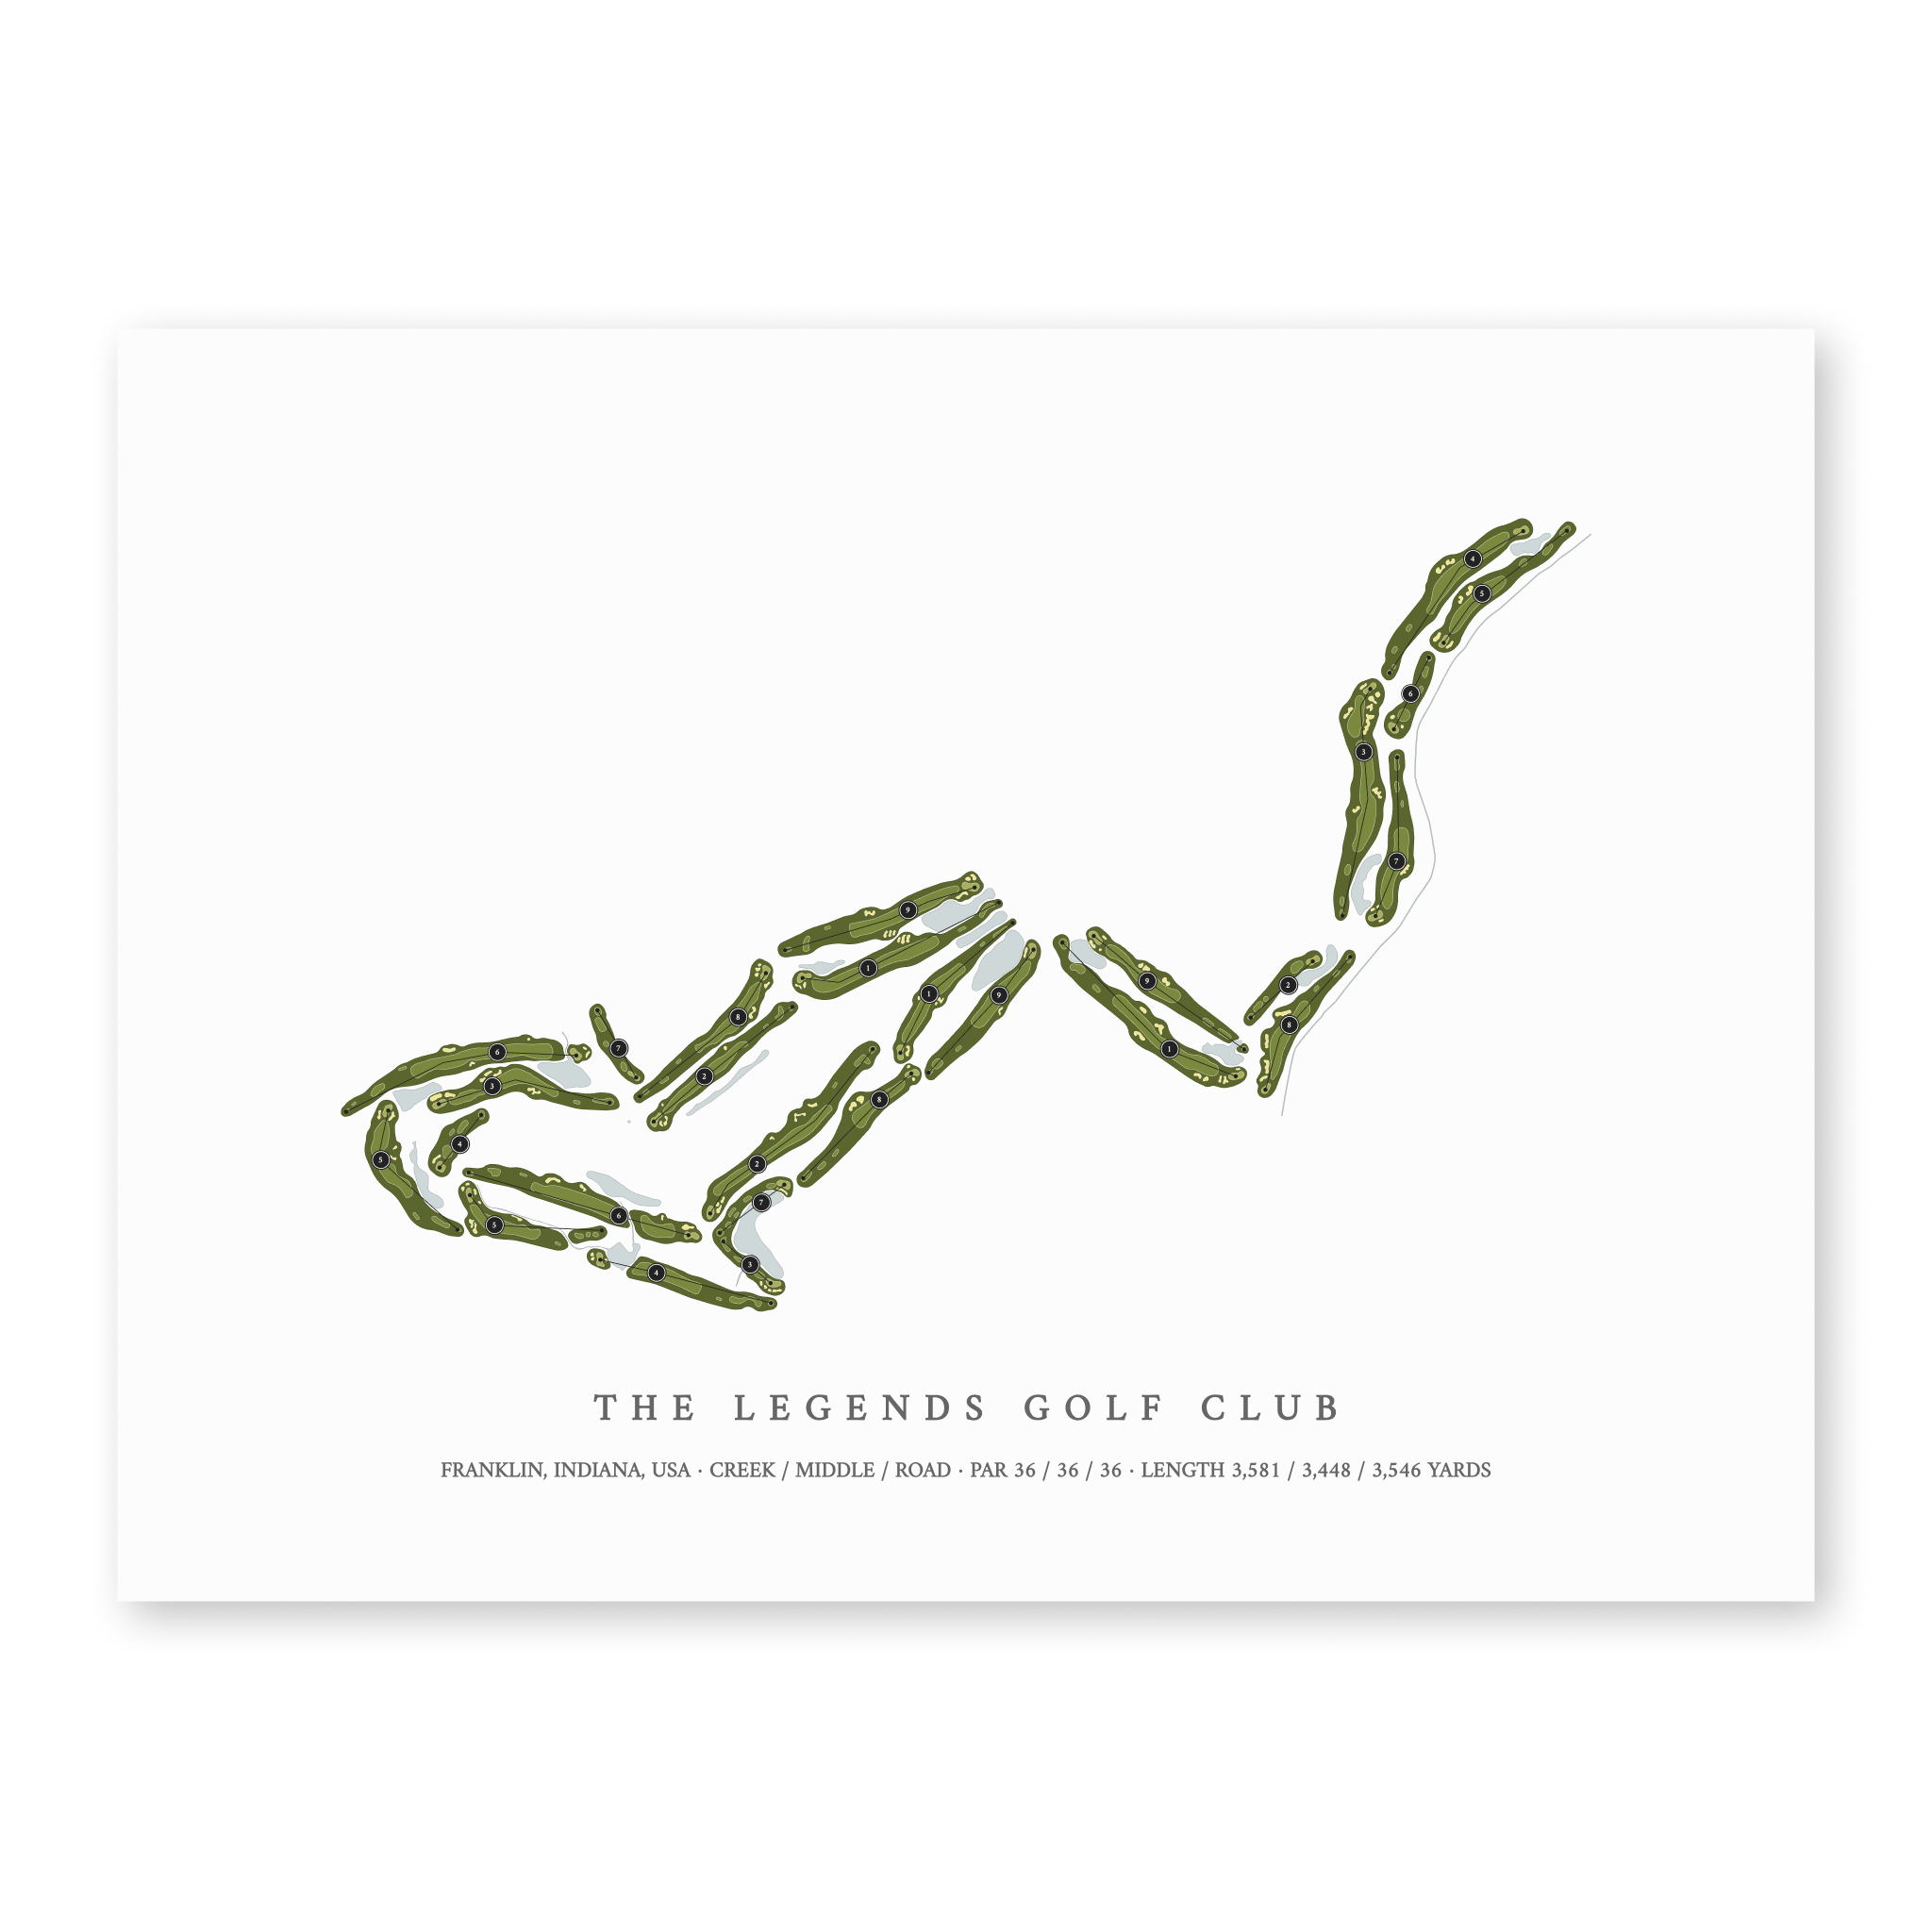 The Legends Golf Club| Golf Course Print | Unframed With Hole Numbers #hole numbers_yes